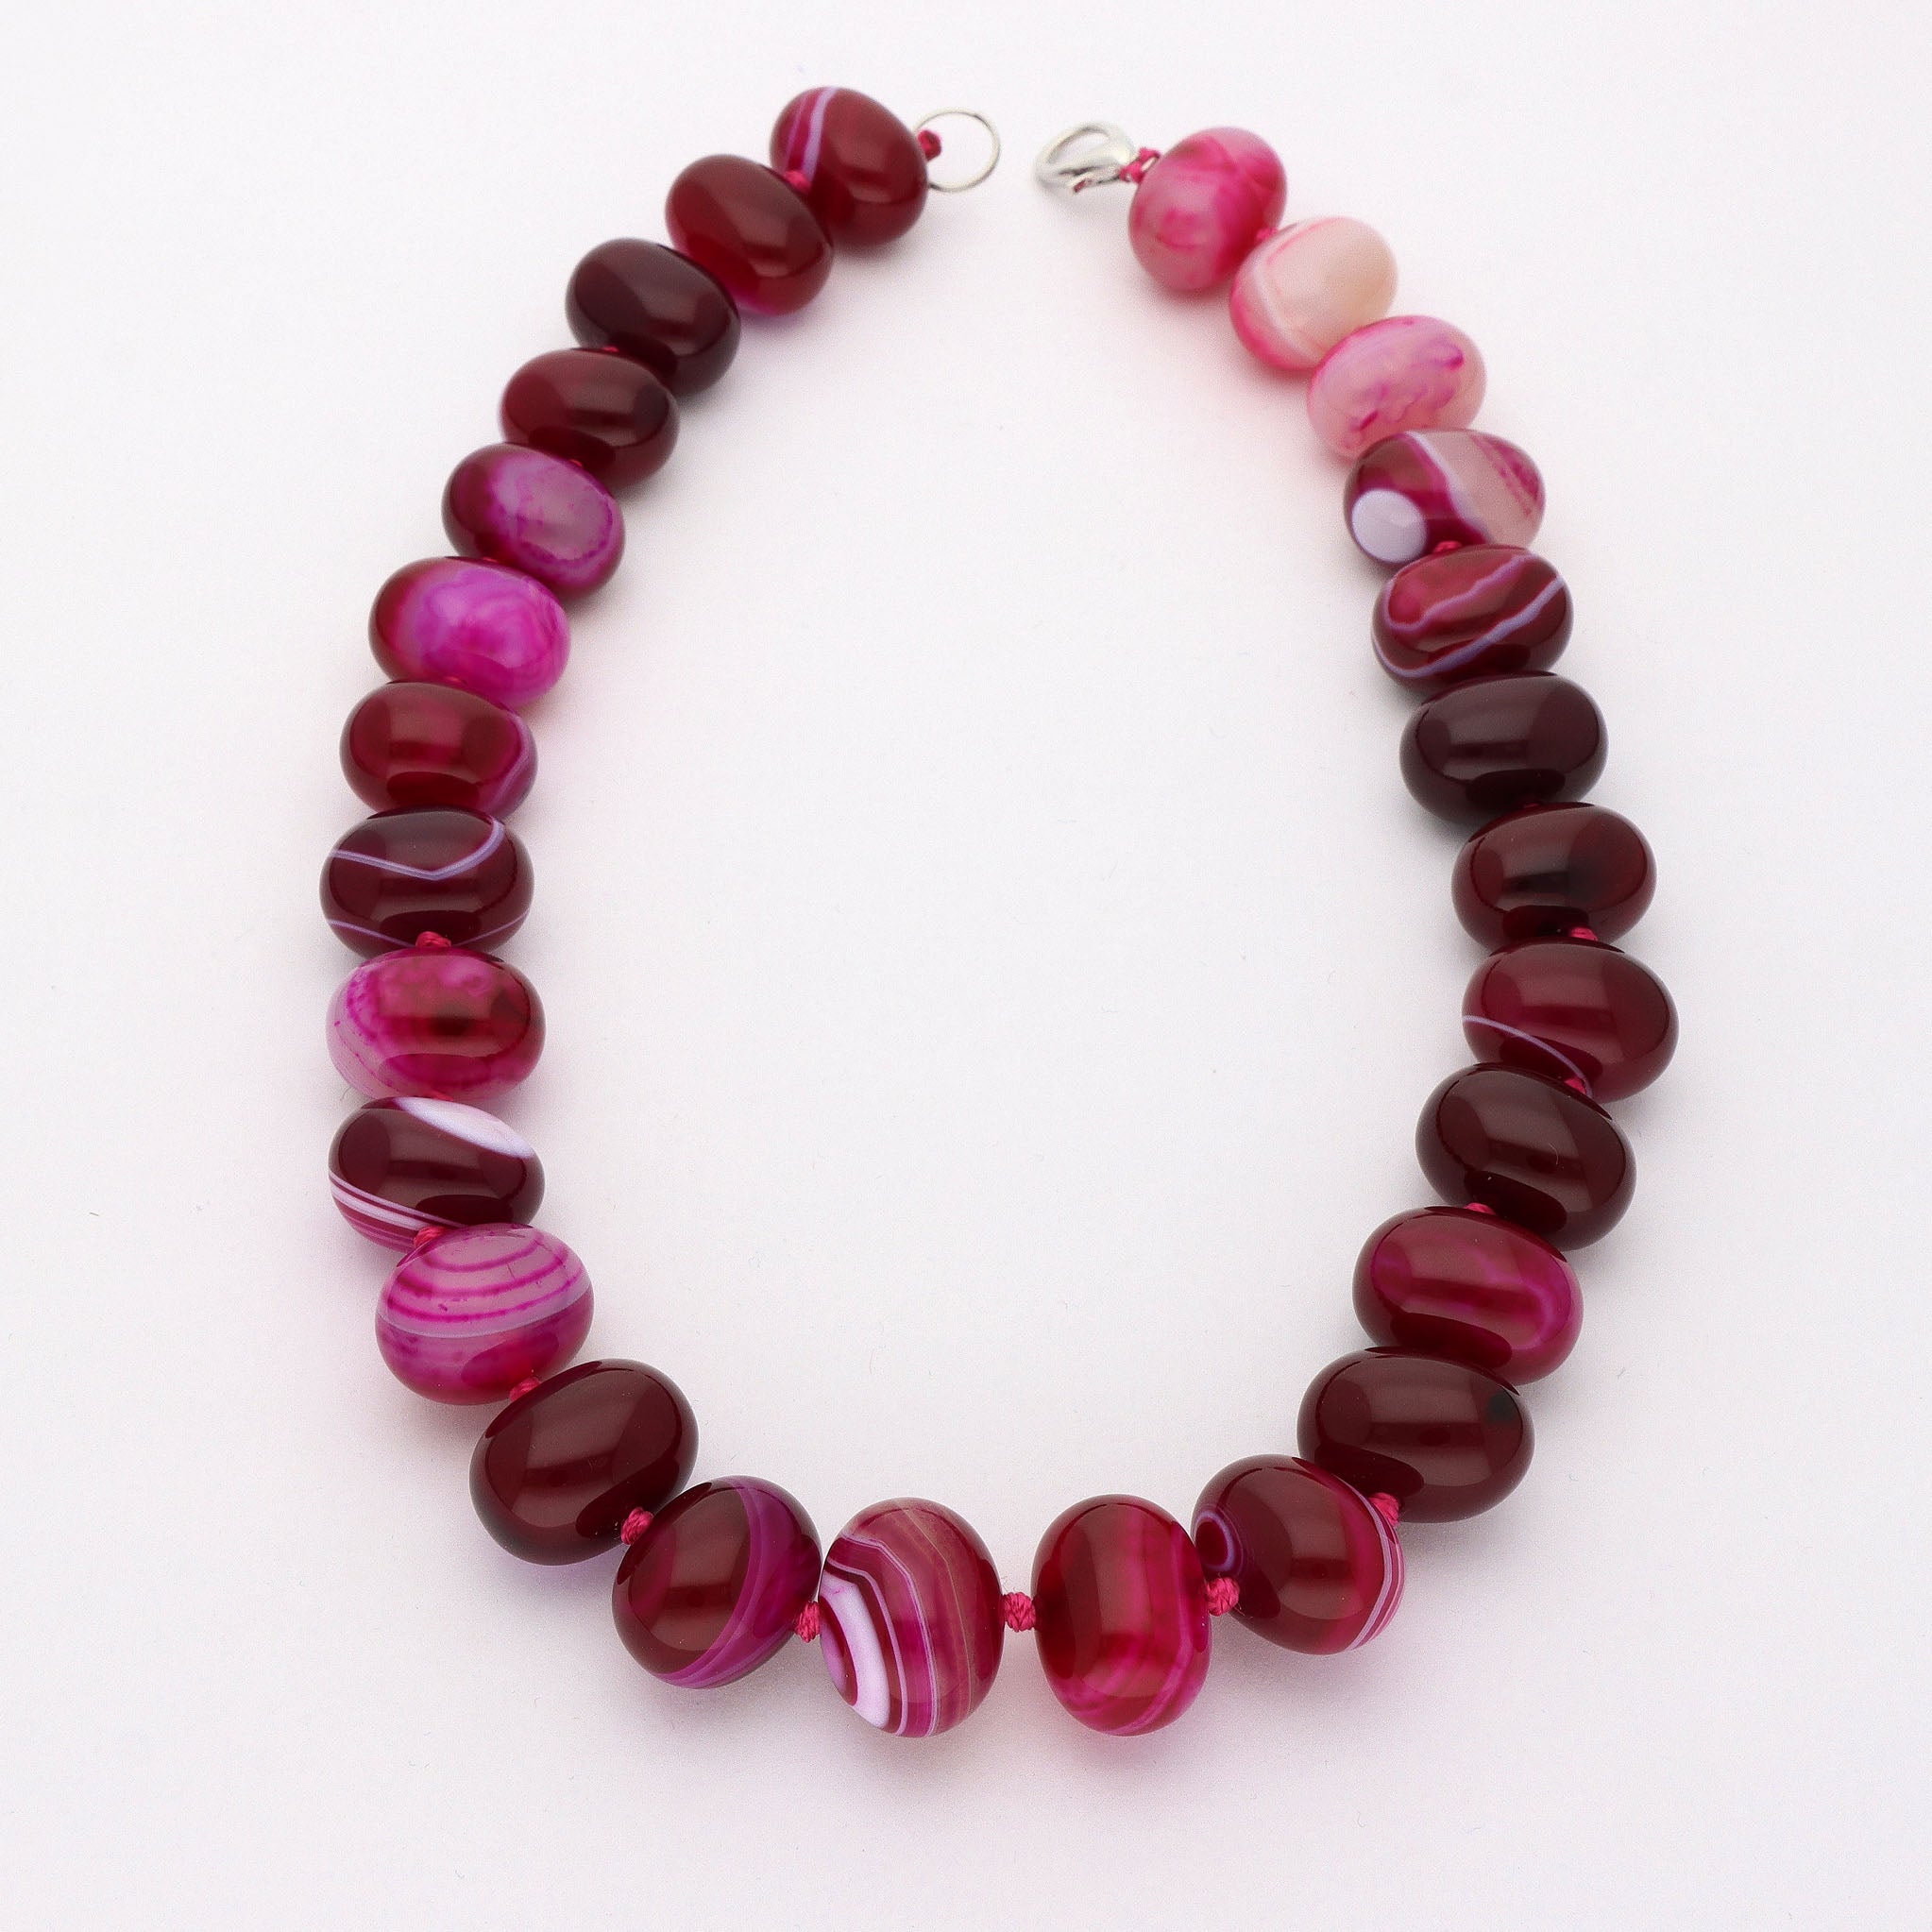 Purple Necklace - Buy Purple Necklace online in India